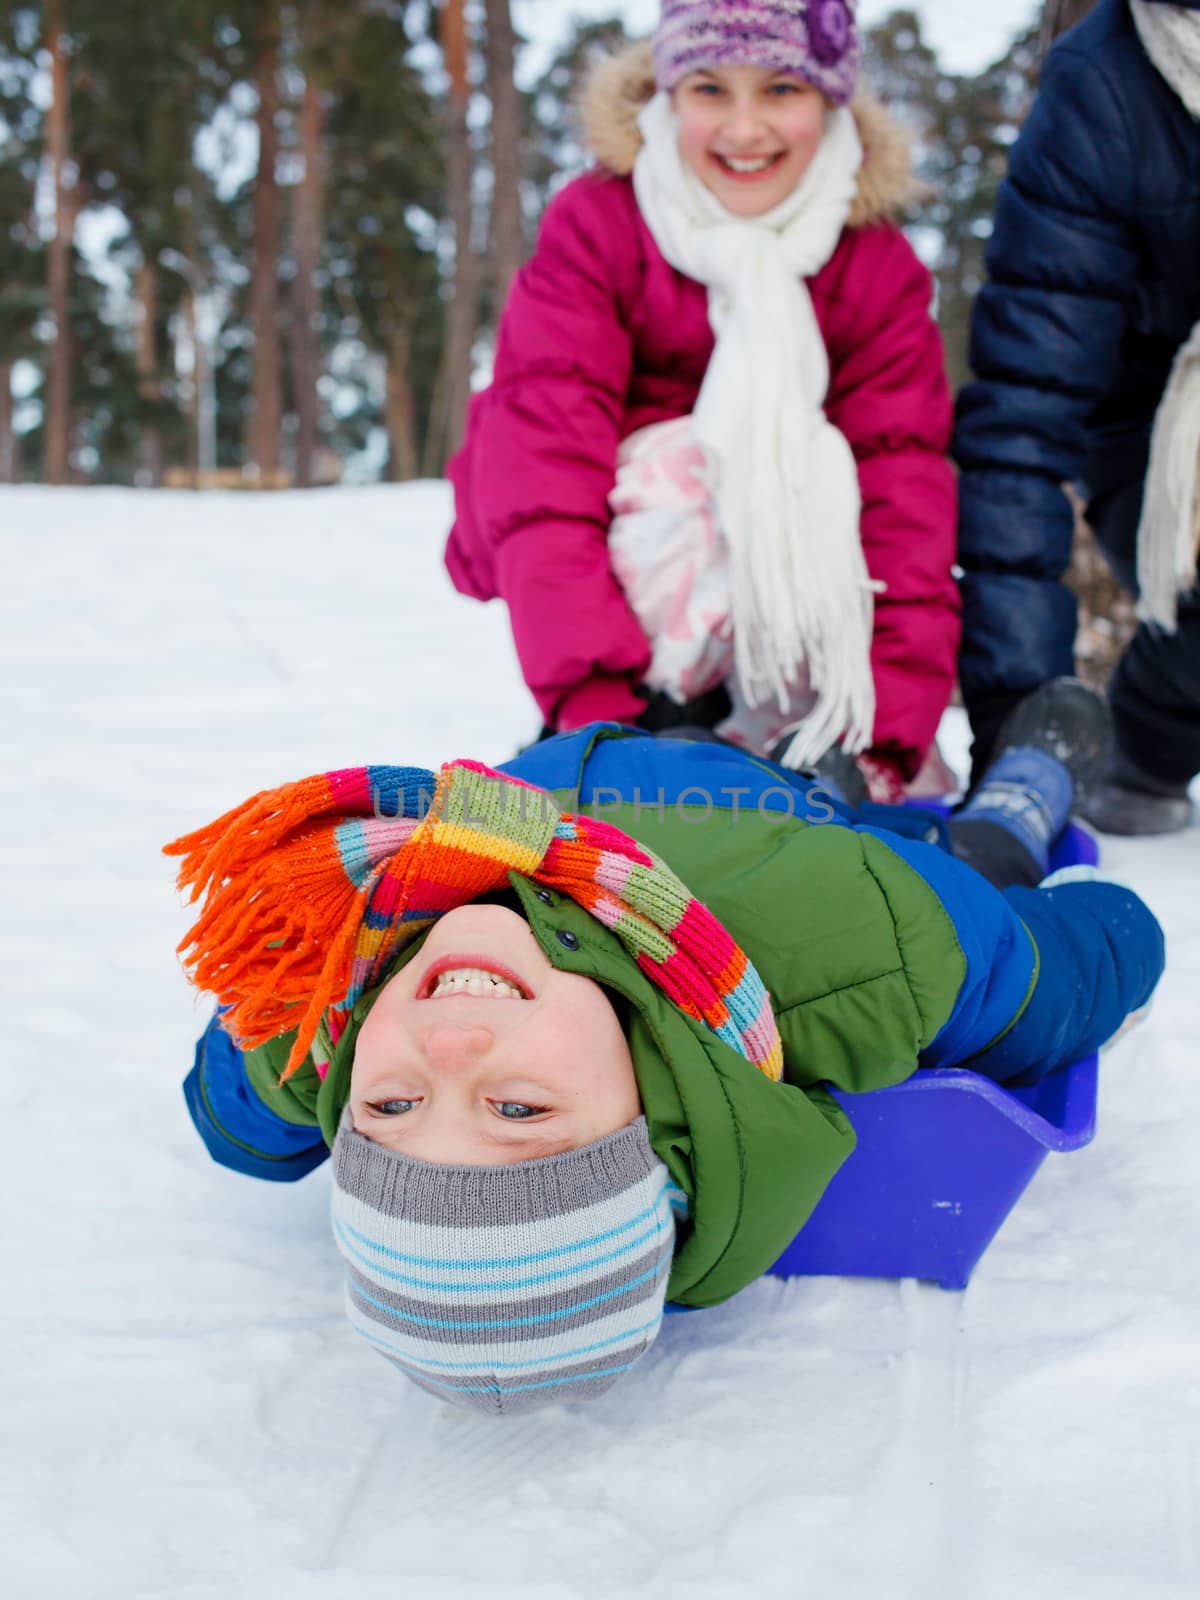 Cute sister and brother on sleds in snow forest. Focus on the boy